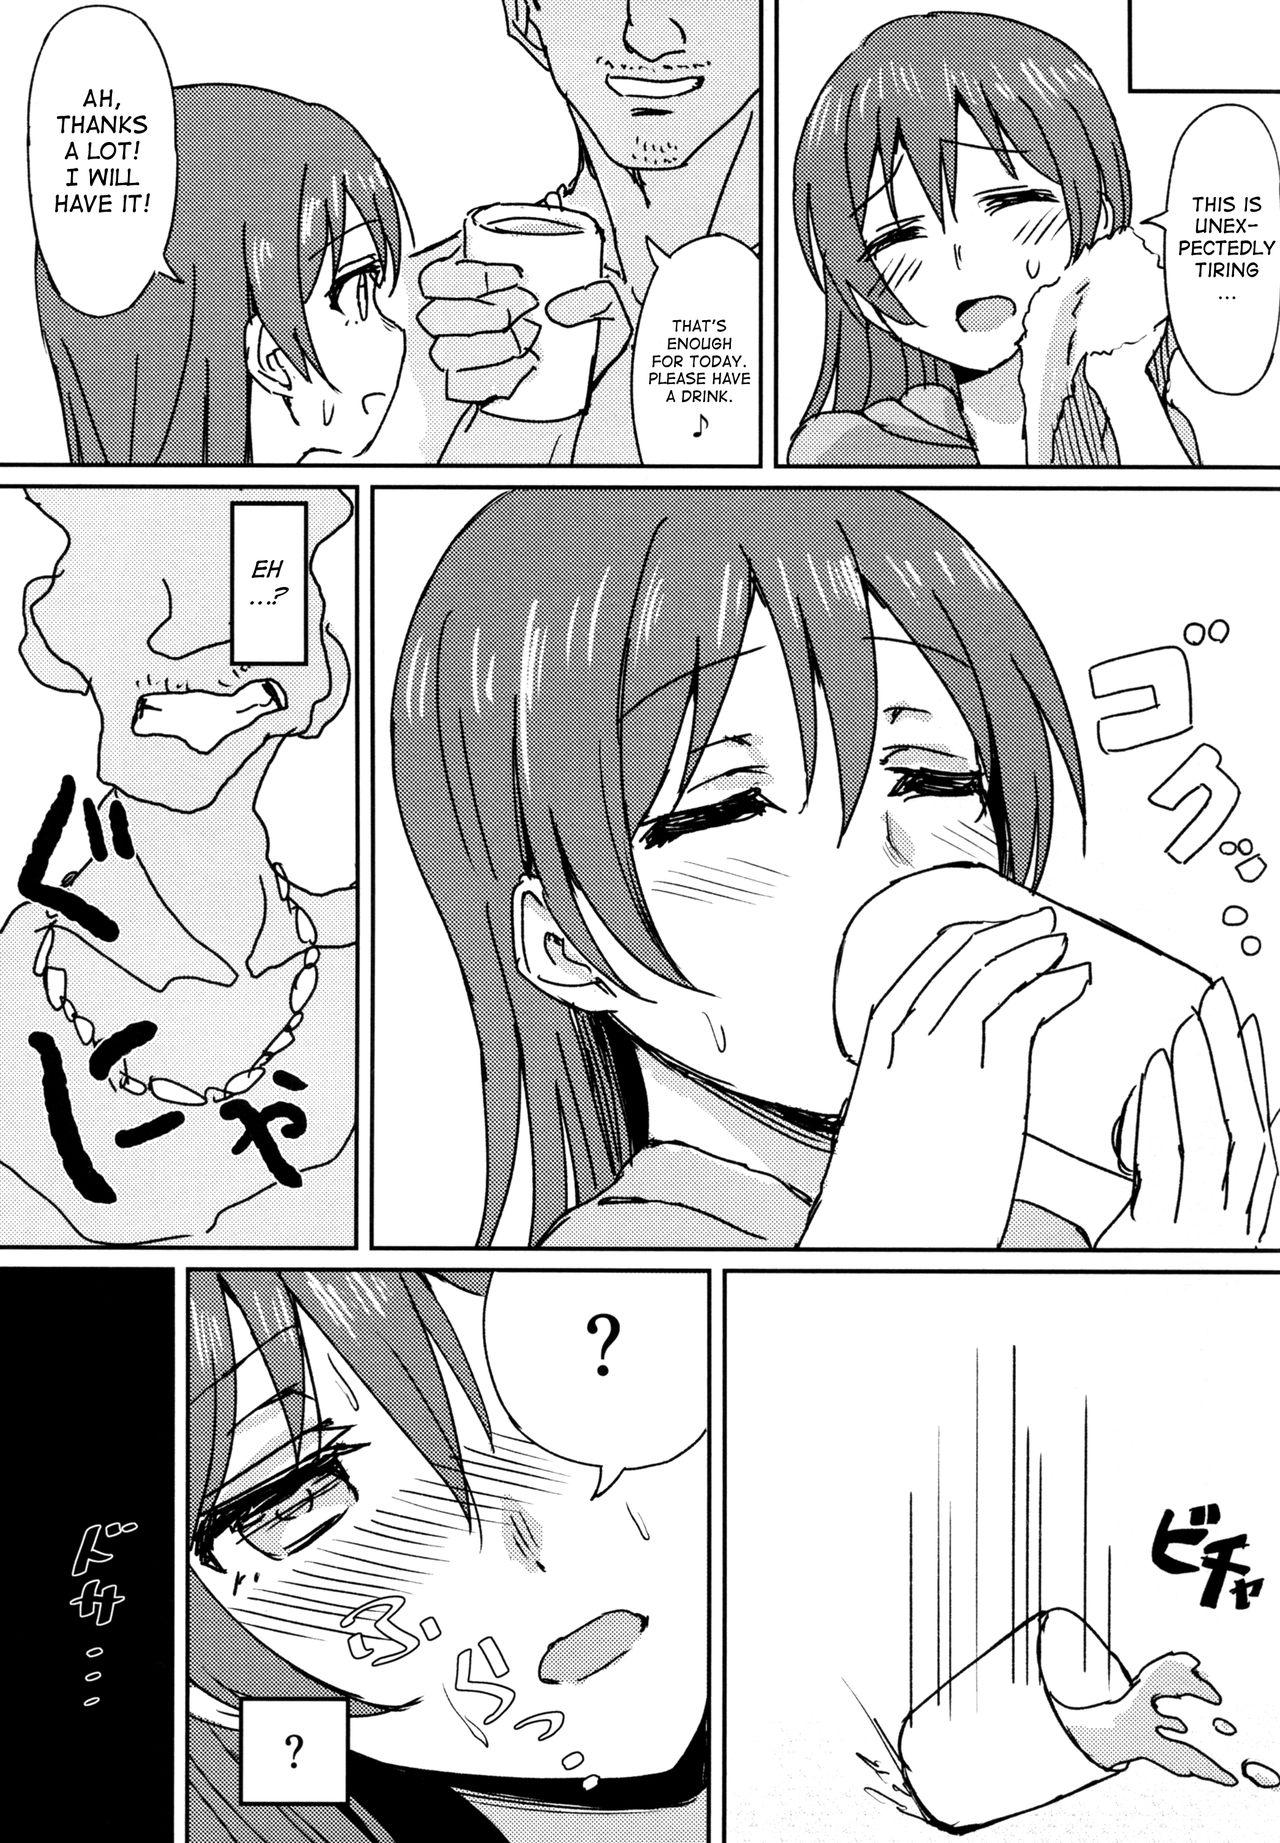 Best Blowjob Hah,Wrench This! - Love live Jock - Page 9